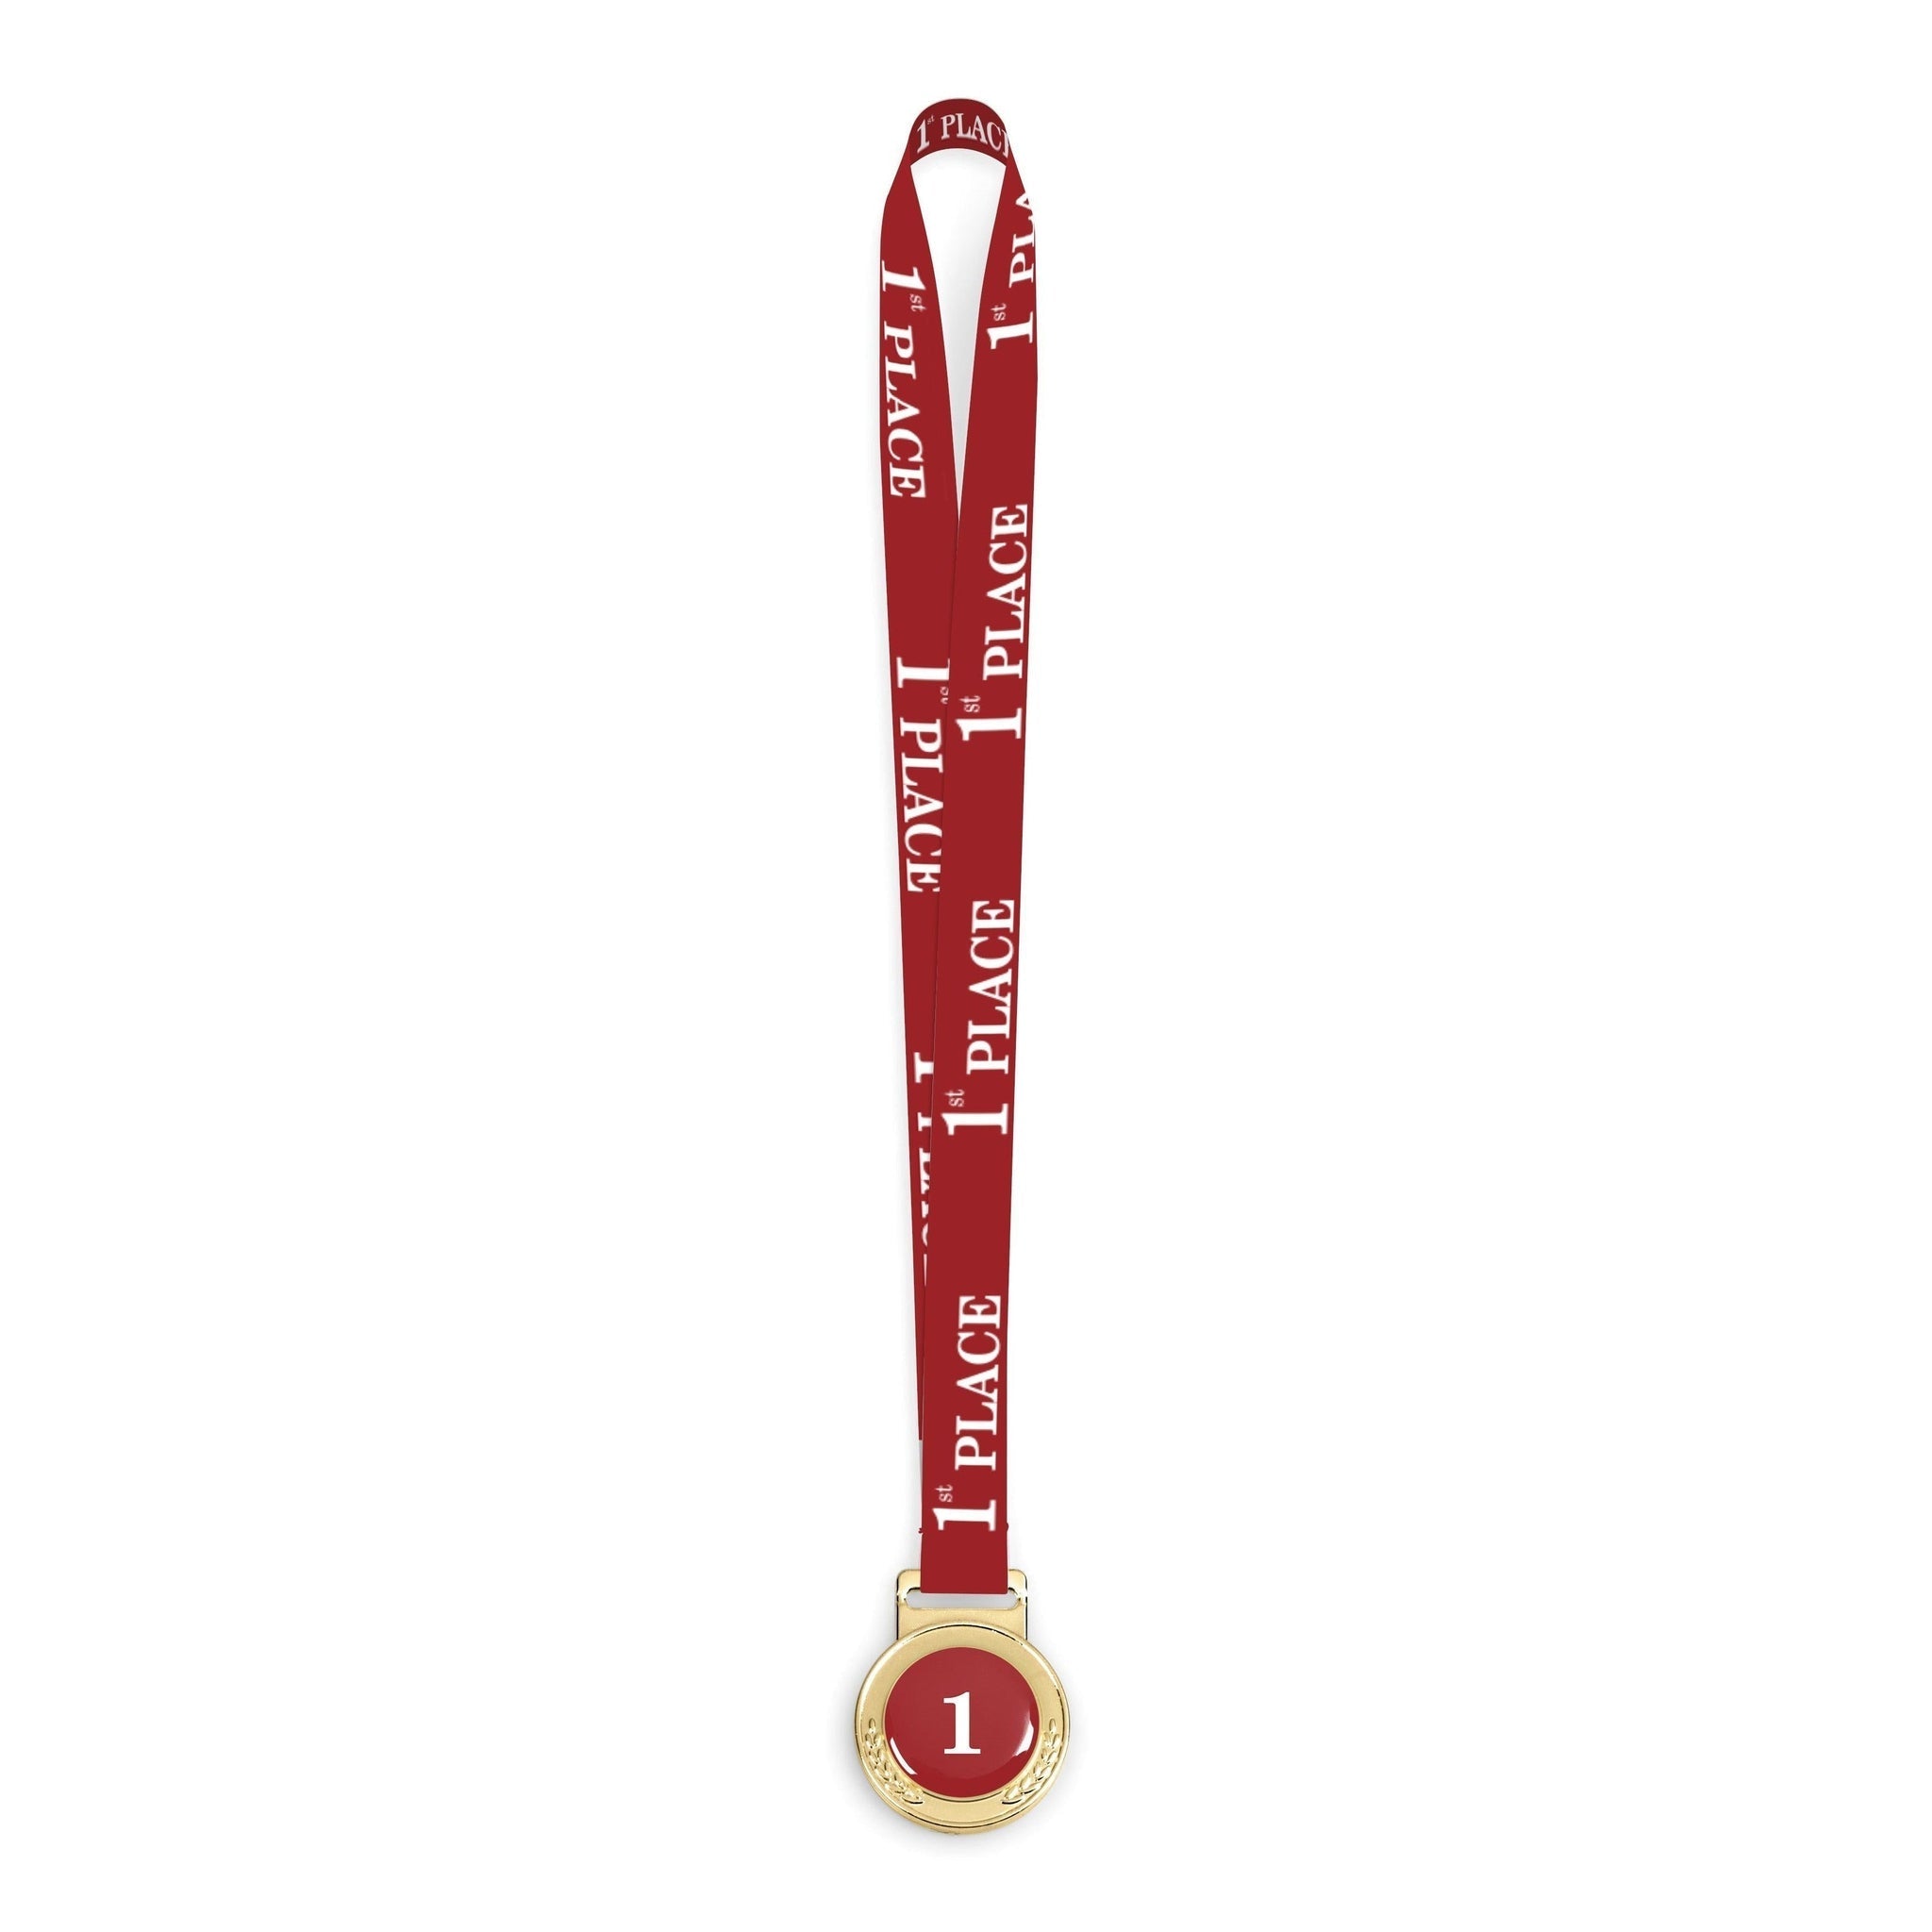 A fully branded gold medal award attached to a red customized satin lanyard with white text, First Place Written on it. The number 1 is printed on the medal.